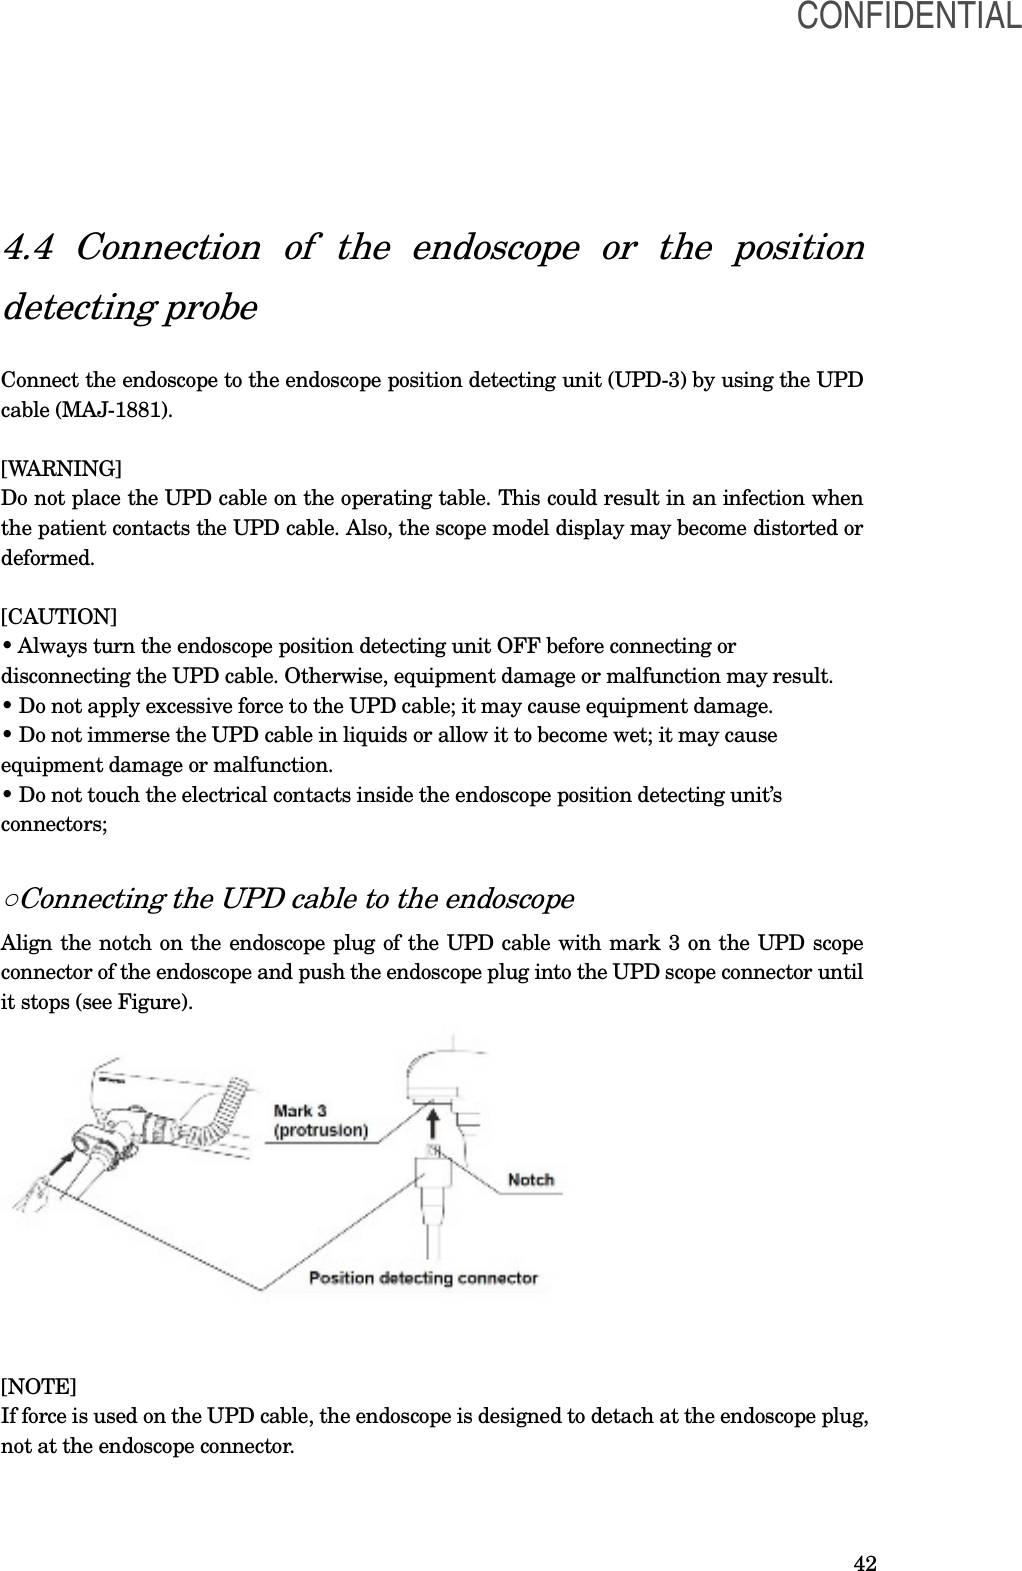  42 4.4  Connection  of  the  endoscope  or  the  position detecting probe  Connect the endoscope to the endoscope position detecting unit (UPD-3) by using the UPD cable (MAJ-1881).  [WARNING] Do not place the UPD cable on the operating table. This could result in an infection when the patient contacts the UPD cable. Also, the scope model display may become distorted or deformed.  [CAUTION] • Always turn the endoscope position detecting unit OFF before connecting or disconnecting the UPD cable. Otherwise, equipment damage or malfunction may result. • Do not apply excessive force to the UPD cable; it may cause equipment damage. • Do not immerse the UPD cable in liquids or allow it to become wet; it may cause equipment damage or malfunction. • Do not touch the electrical contacts inside the endoscope position detecting unit’s connectors;  ○Connecting the UPD cable to the endoscope Align the notch on the endoscope plug of the UPD cable with mark 3 on the UPD scope connector of the endoscope and push the endoscope plug into the UPD scope connector until it stops (see Figure).    [NOTE] If force is used on the UPD cable, the endoscope is designed to detach at the endoscope plug, not at the endoscope connector.  CONFIDENTIAL